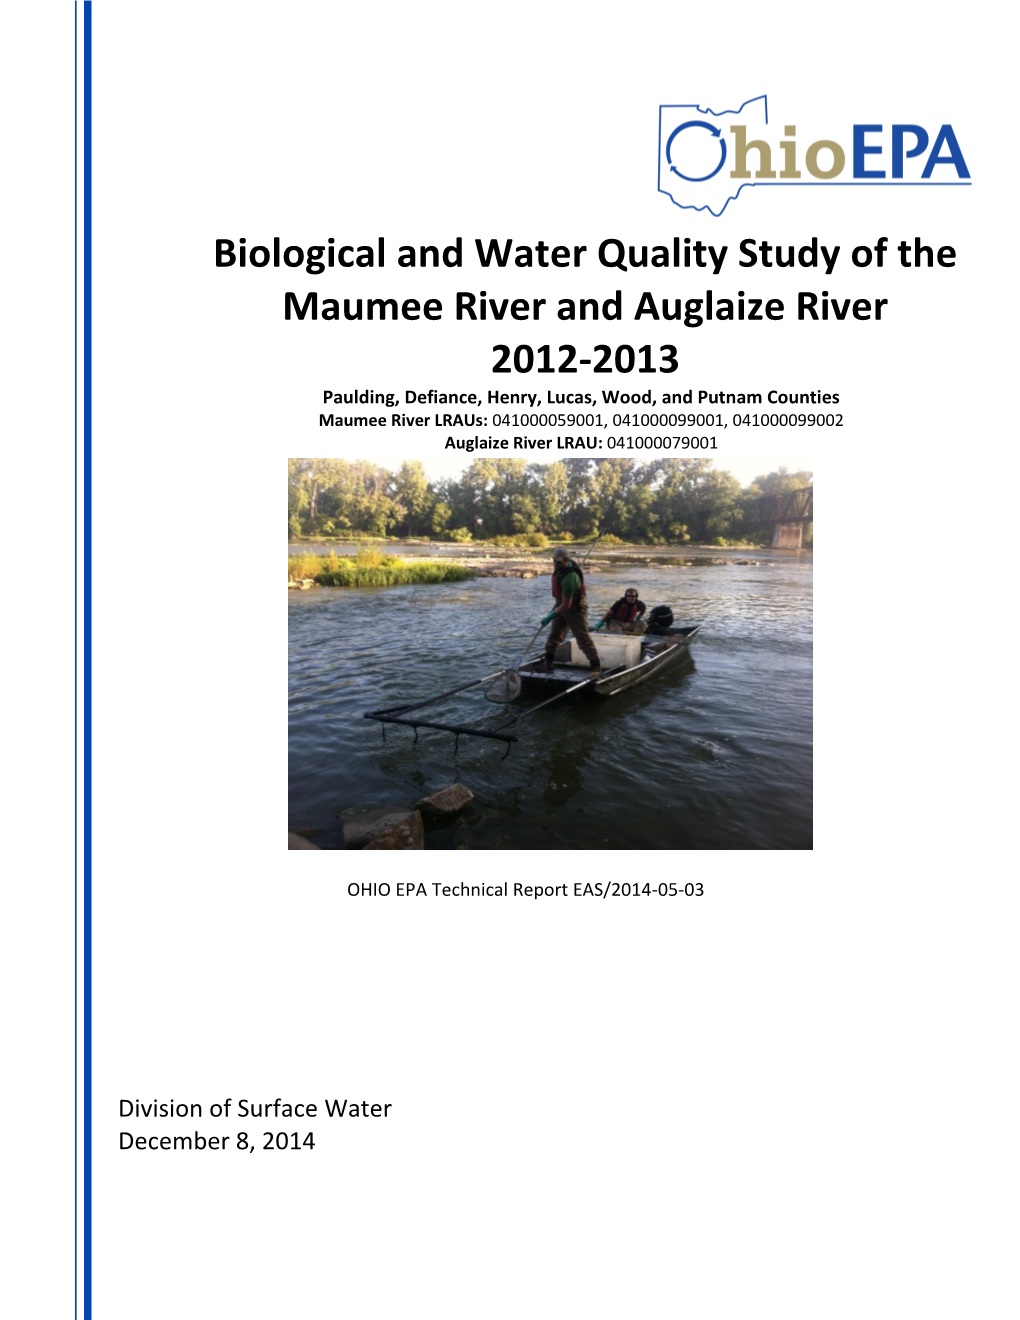 Biological and Water Quality Study of the Maumee River and Auglaize